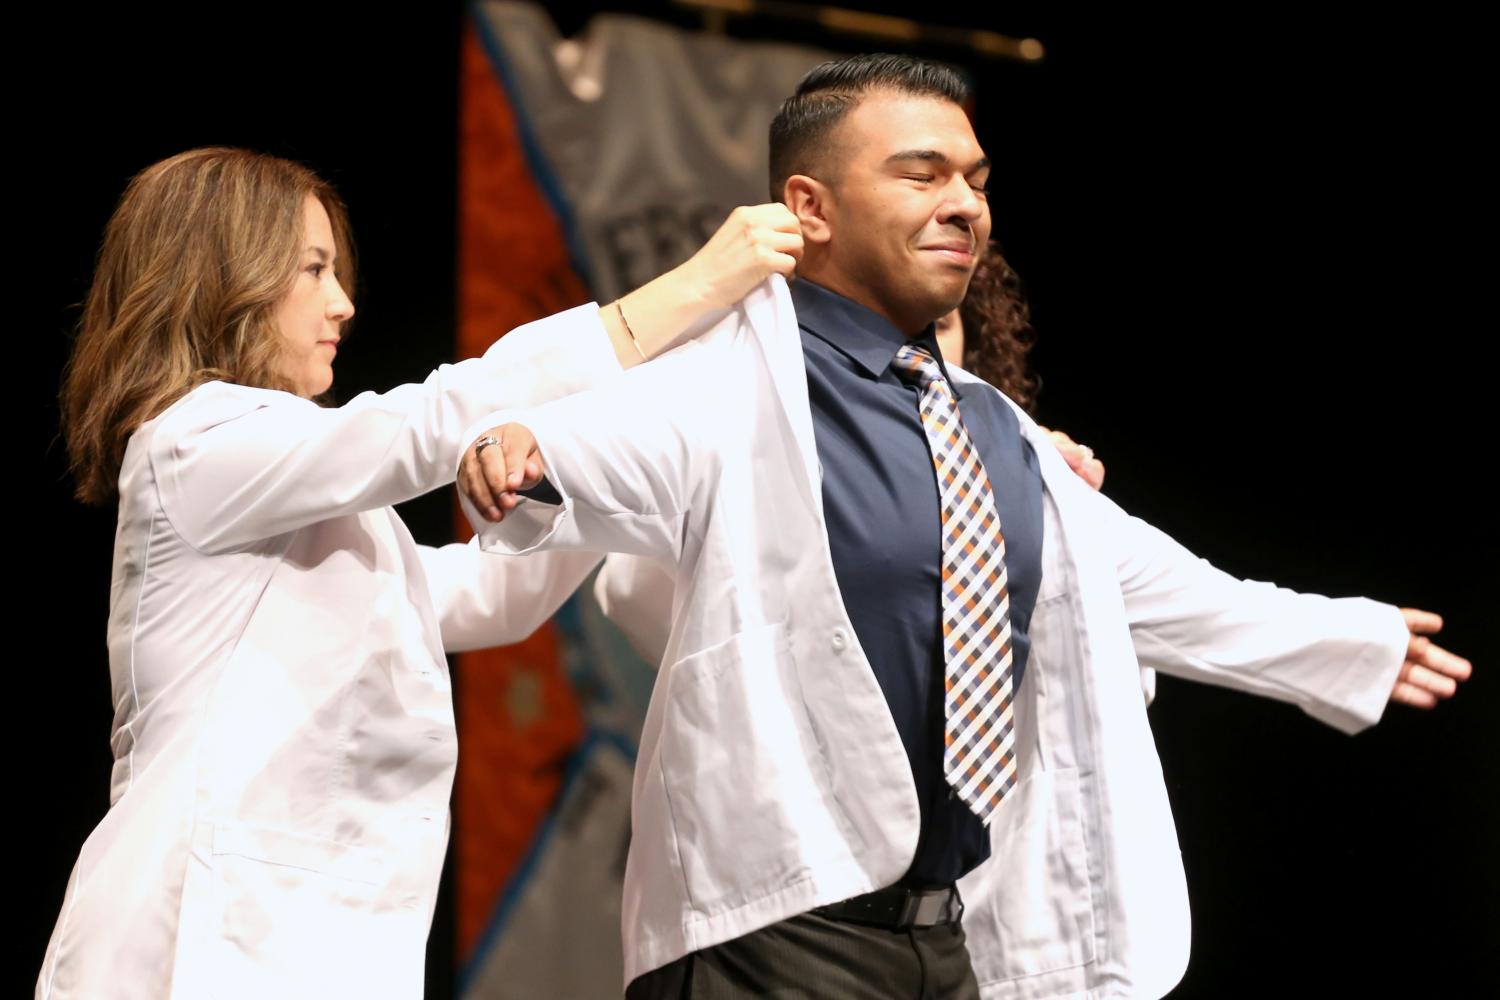 Director of experiential education clinical professor Jacquelyn P. Navarrete and chair of pharmacy practice and clinical sciences clinical professor Amanda M. Loya help students put on coats during the presentation of white coats.